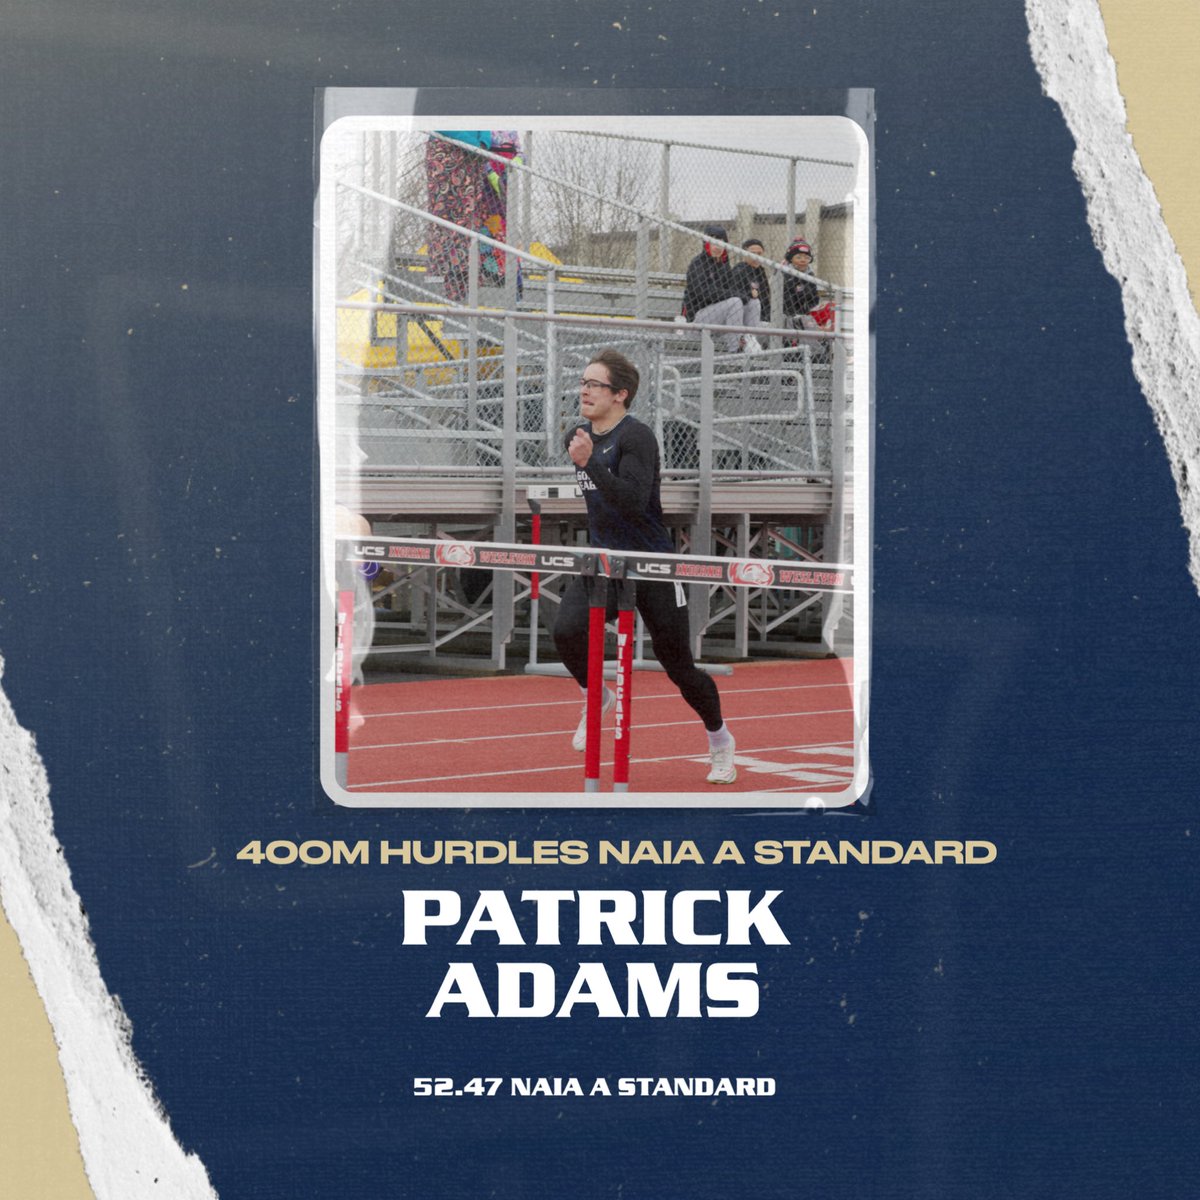 🚨🚨NATIONAL QUALIFIER ALERT🚨🚨 Men’s 400H from Hillsdale Patrick Adams gets his @NAIA auto qualifier in 52.47 which moves him up to 2nd on the @CornerstoneXCTF all-time list. #TogetherWeSOAR